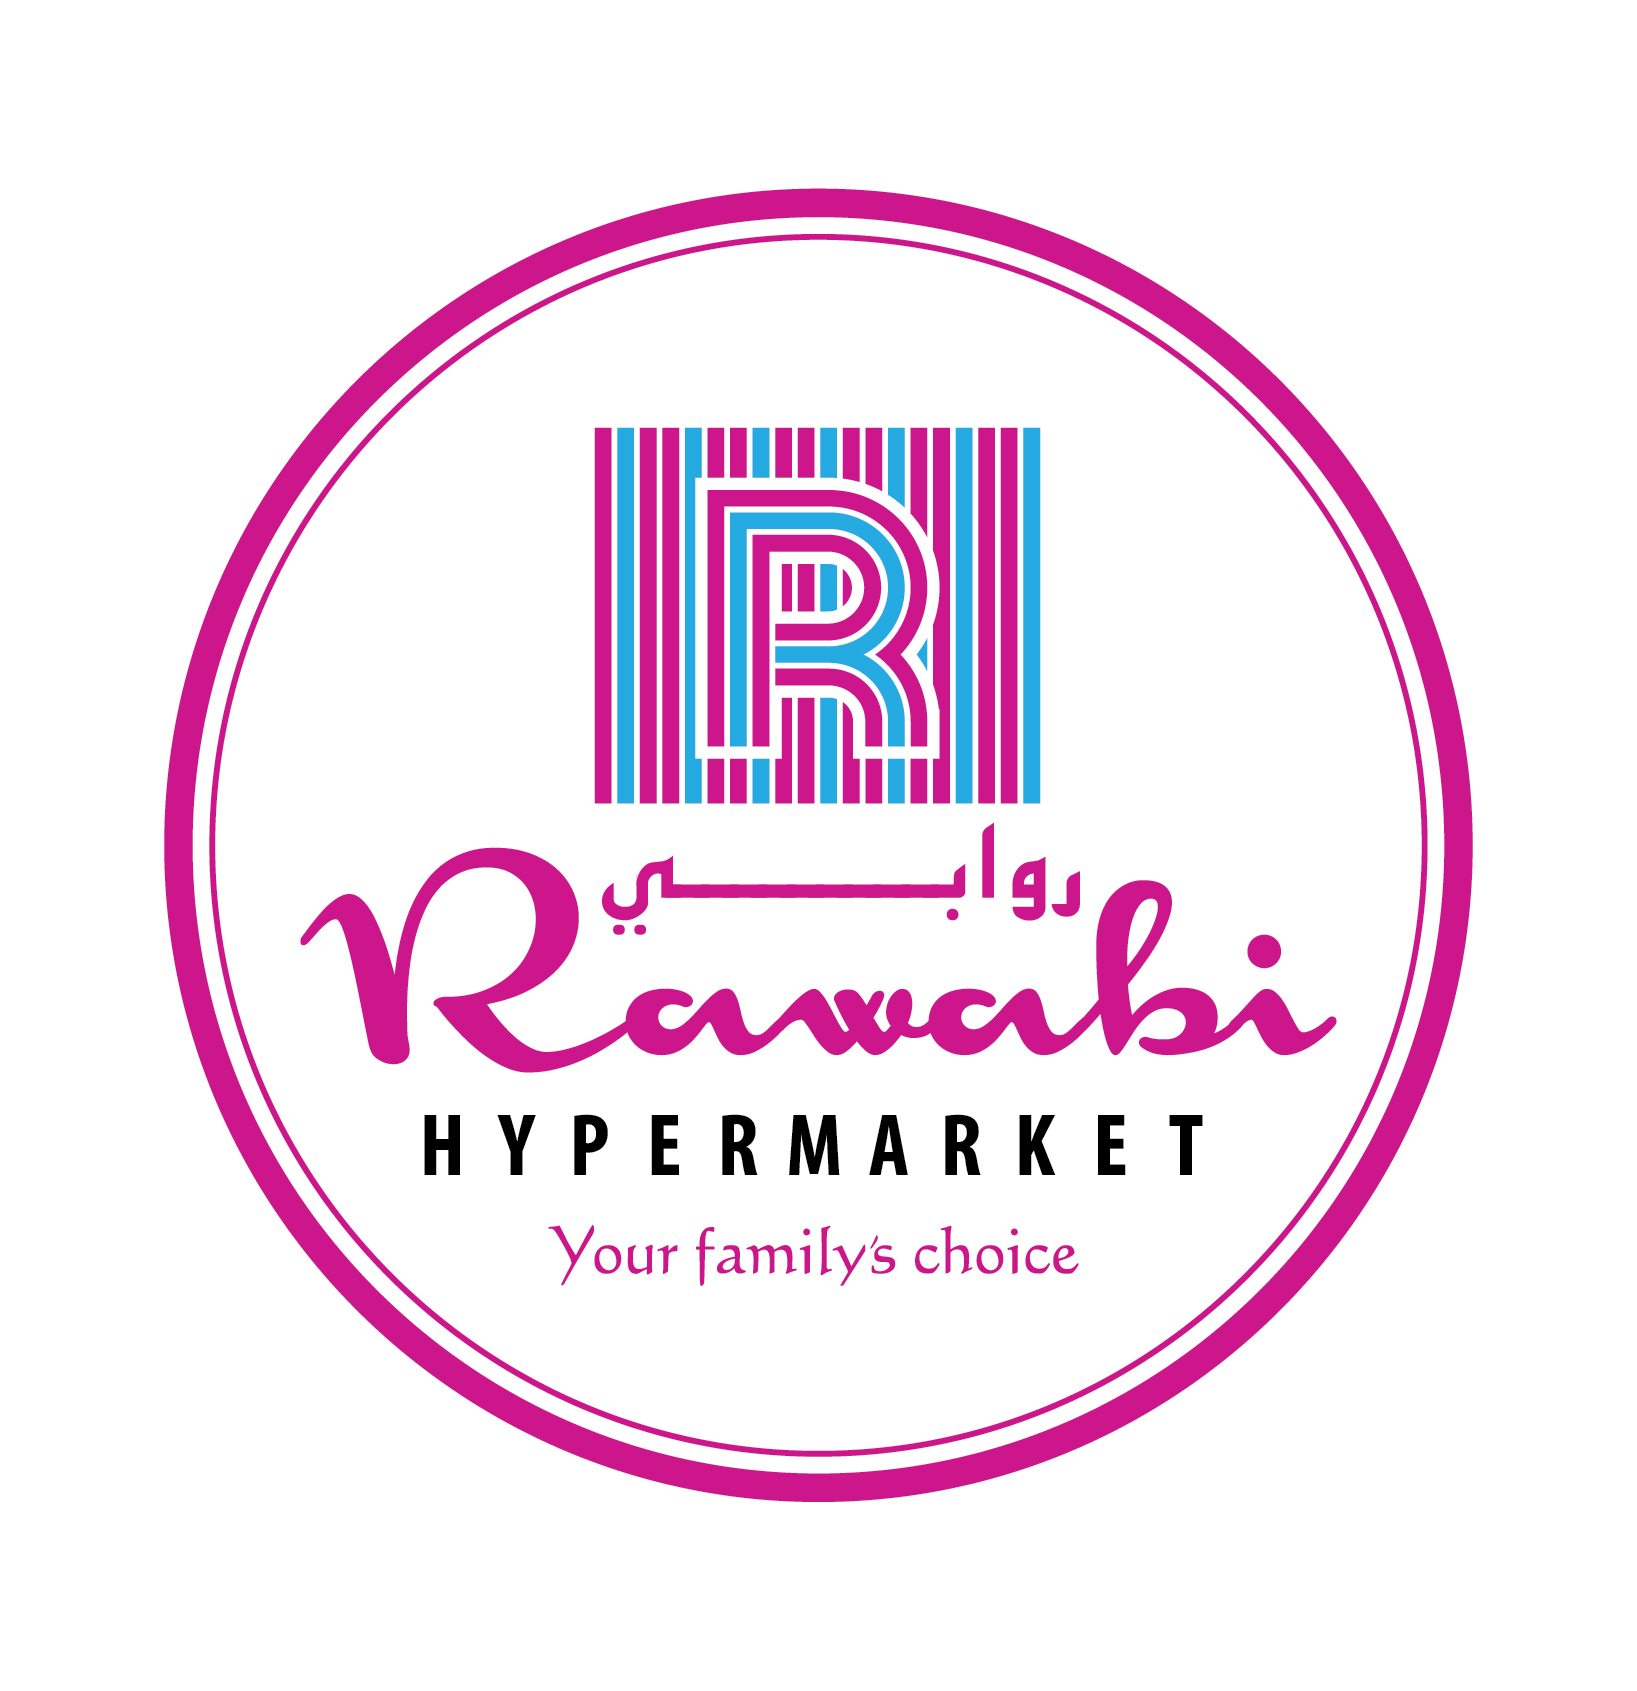 Rawabi Hypermarket announces grand winner of Shop and Win coupon draw